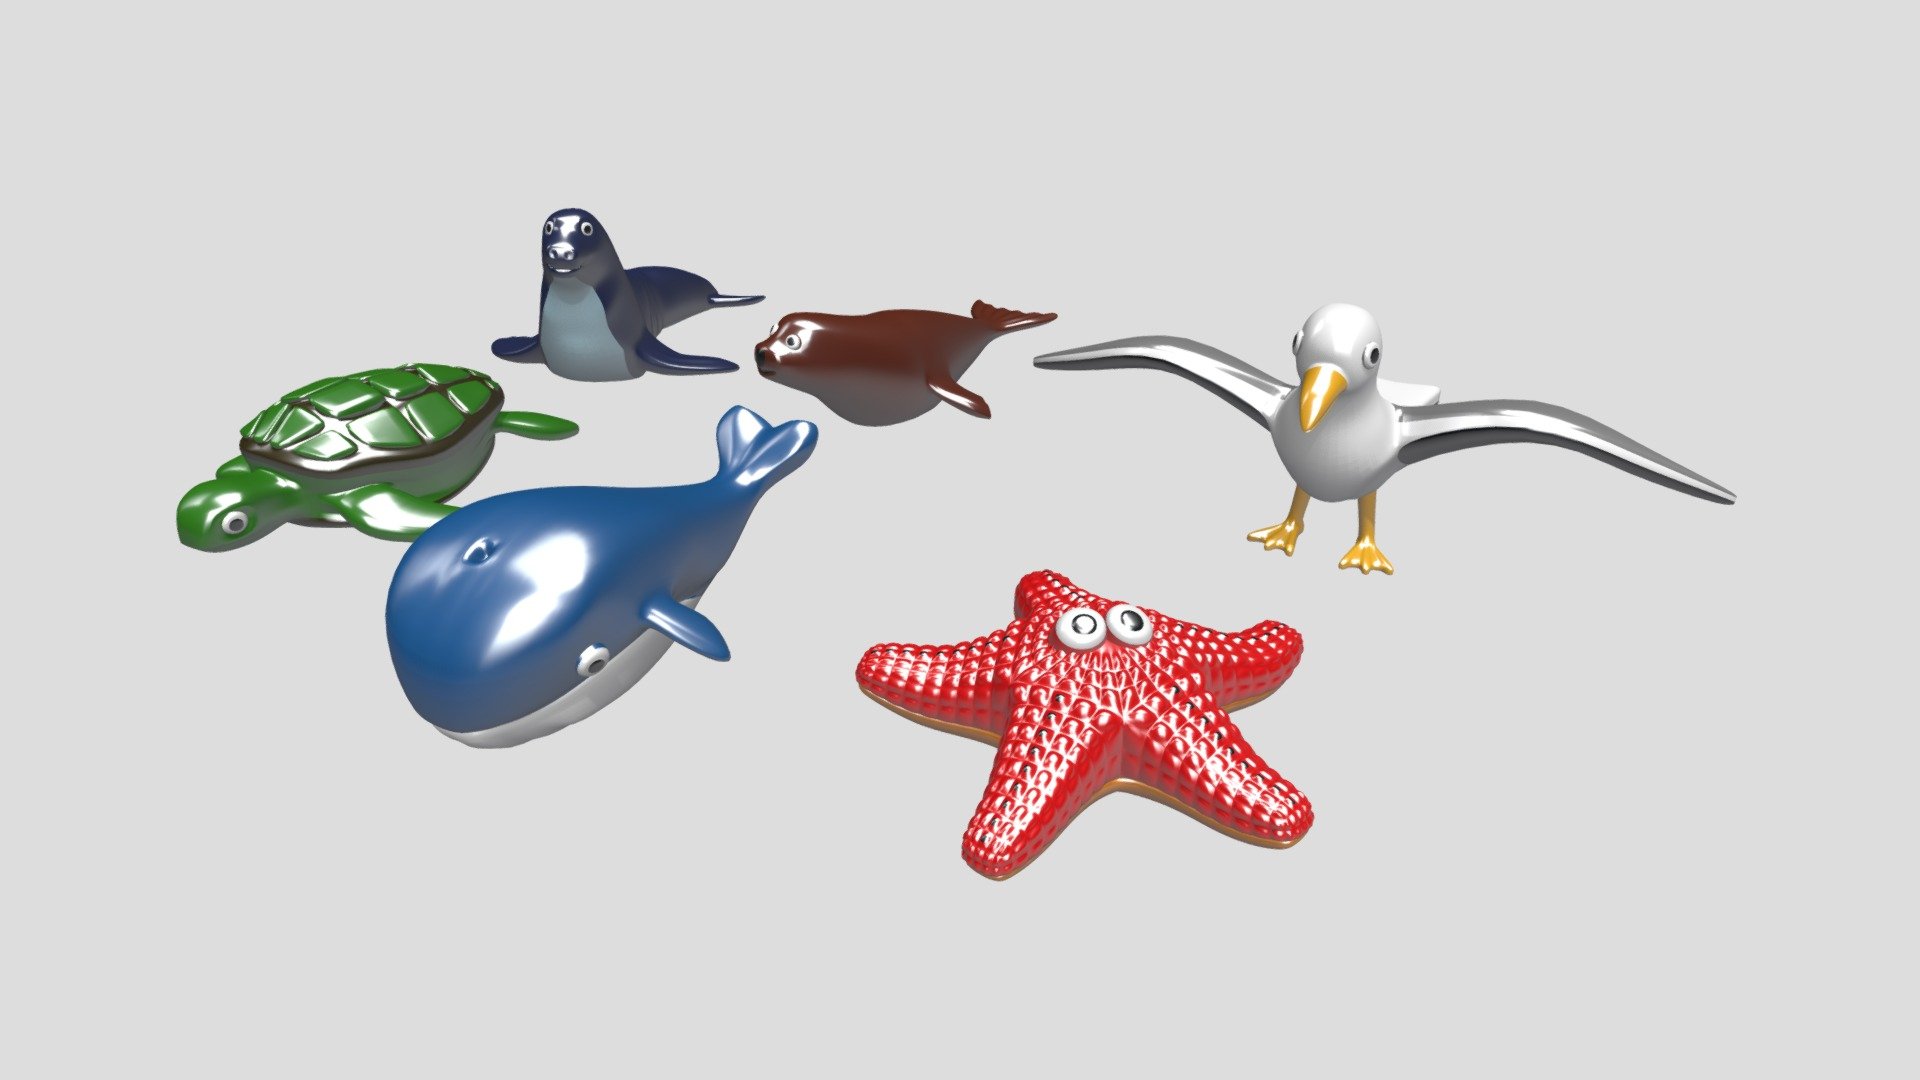 Sea Creatures toys in Kinder-Surprise style